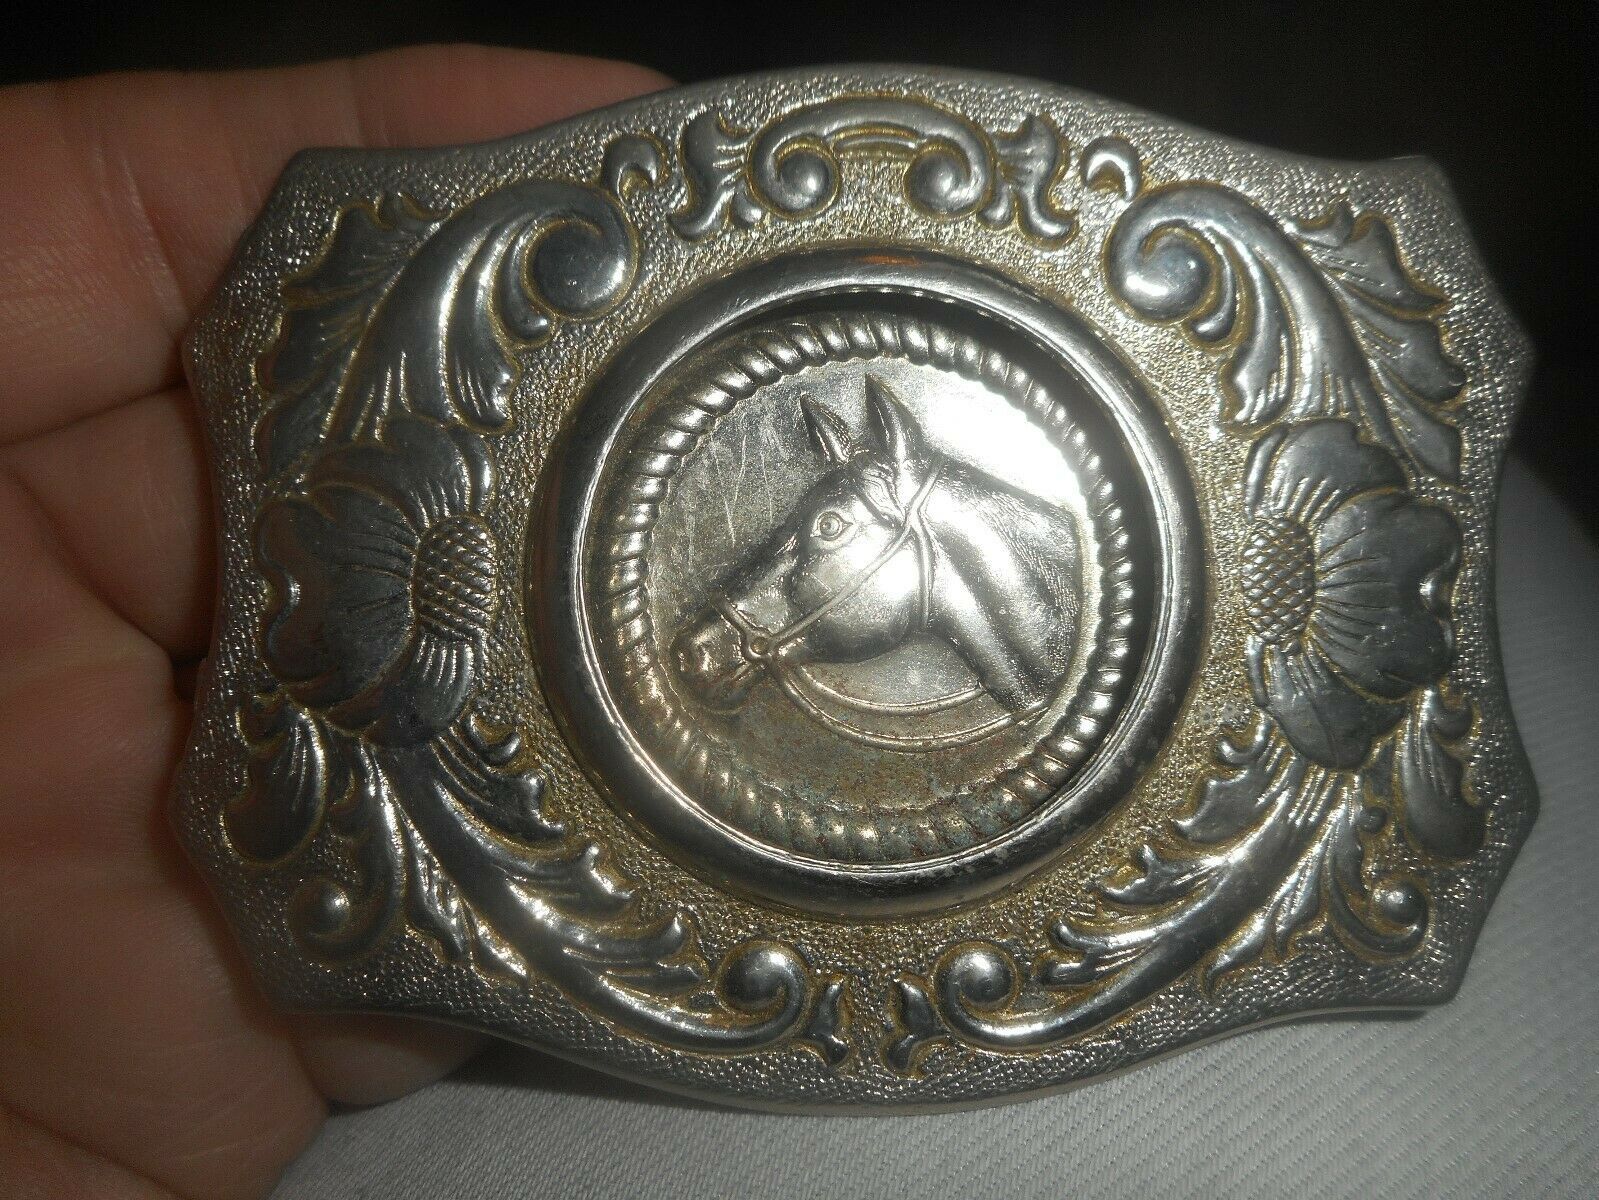 Vintage Western Cowboy Gold Plated Horse Head Belt Buckle by Chambers